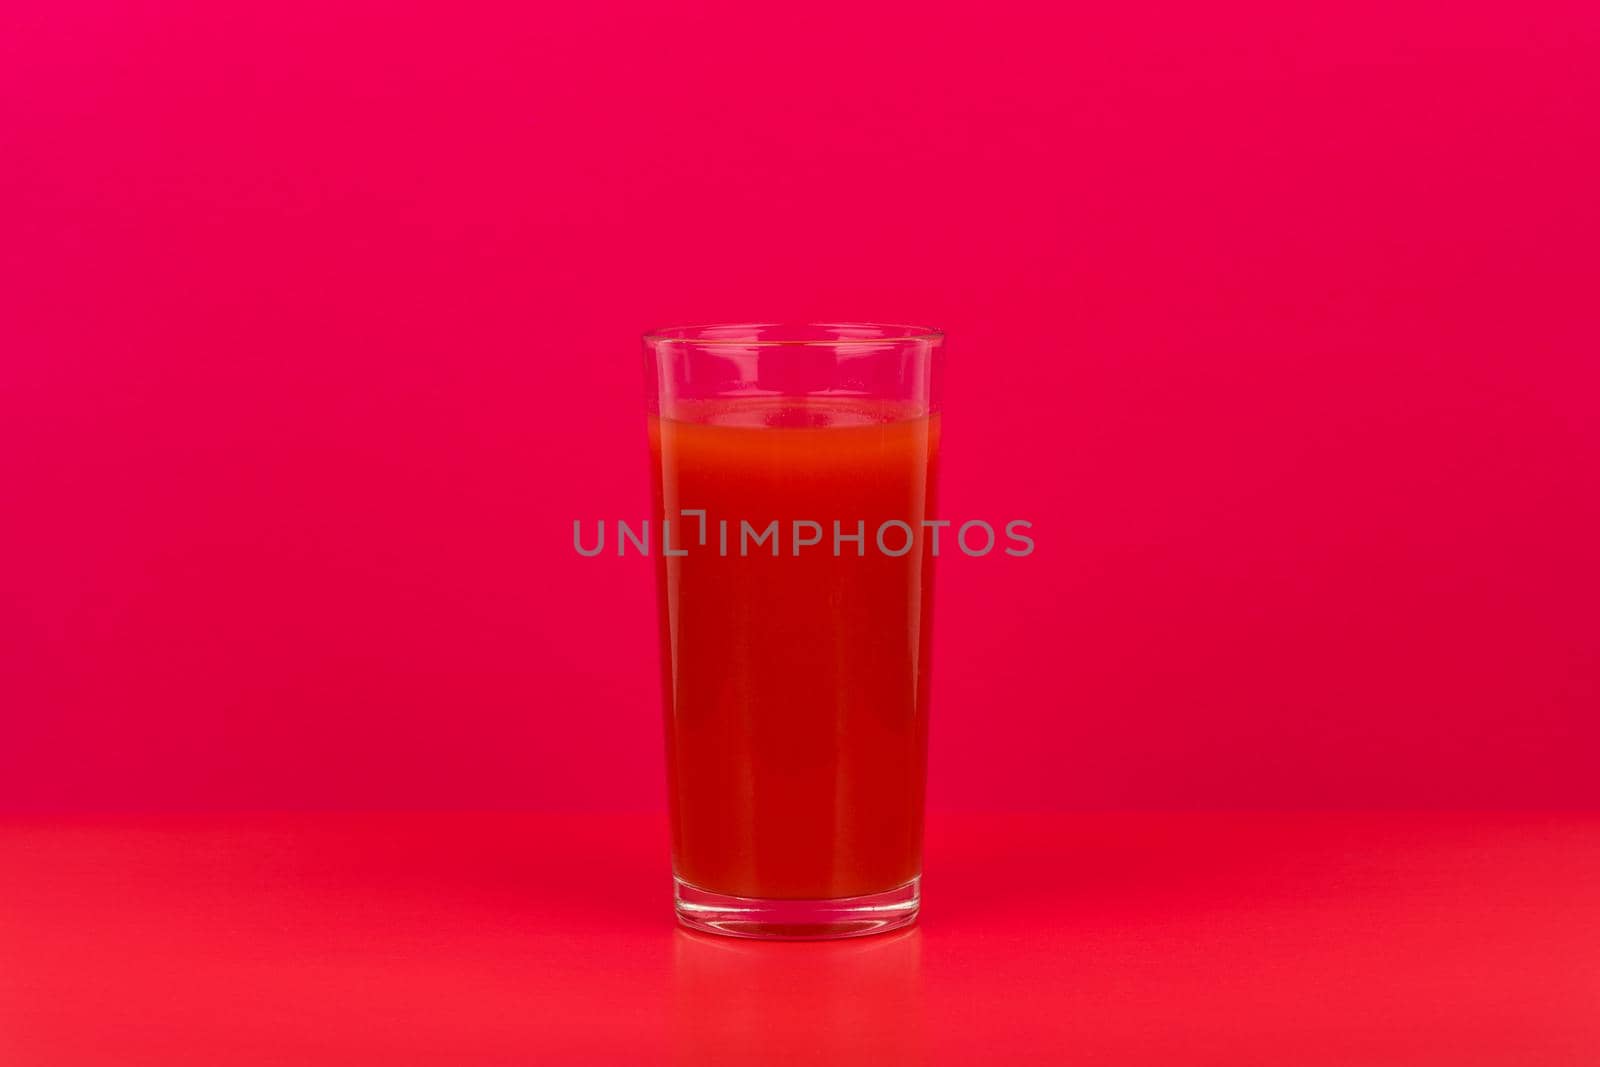 Glass of tomato juice on red table against pink background with copy space. Concept of vegan food and healthy eating by Senorina_Irina